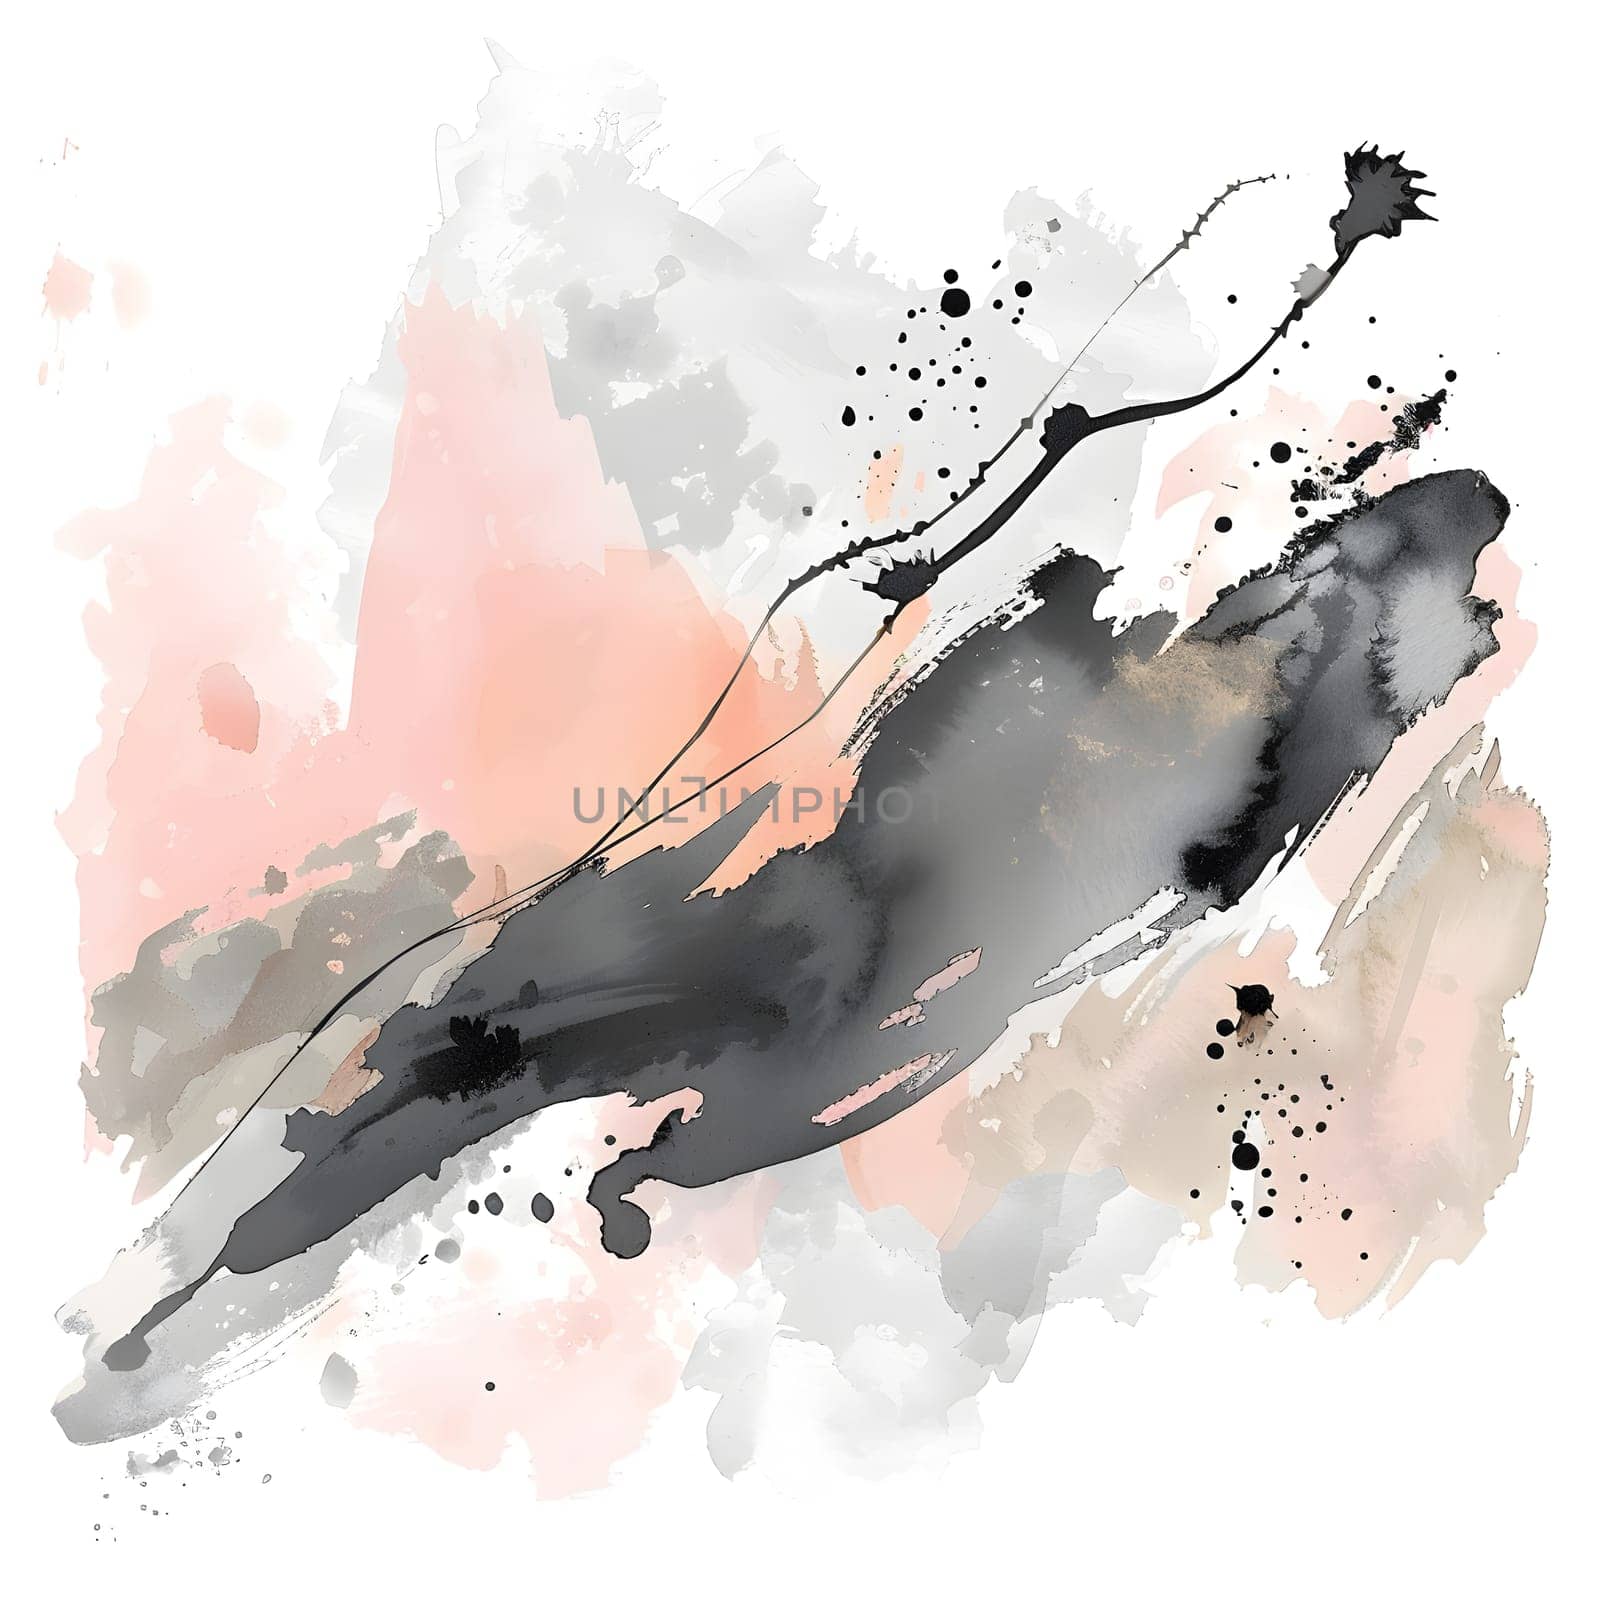 Fluid watercolor art with bold brush strokes and vibrant hues by Nadtochiy